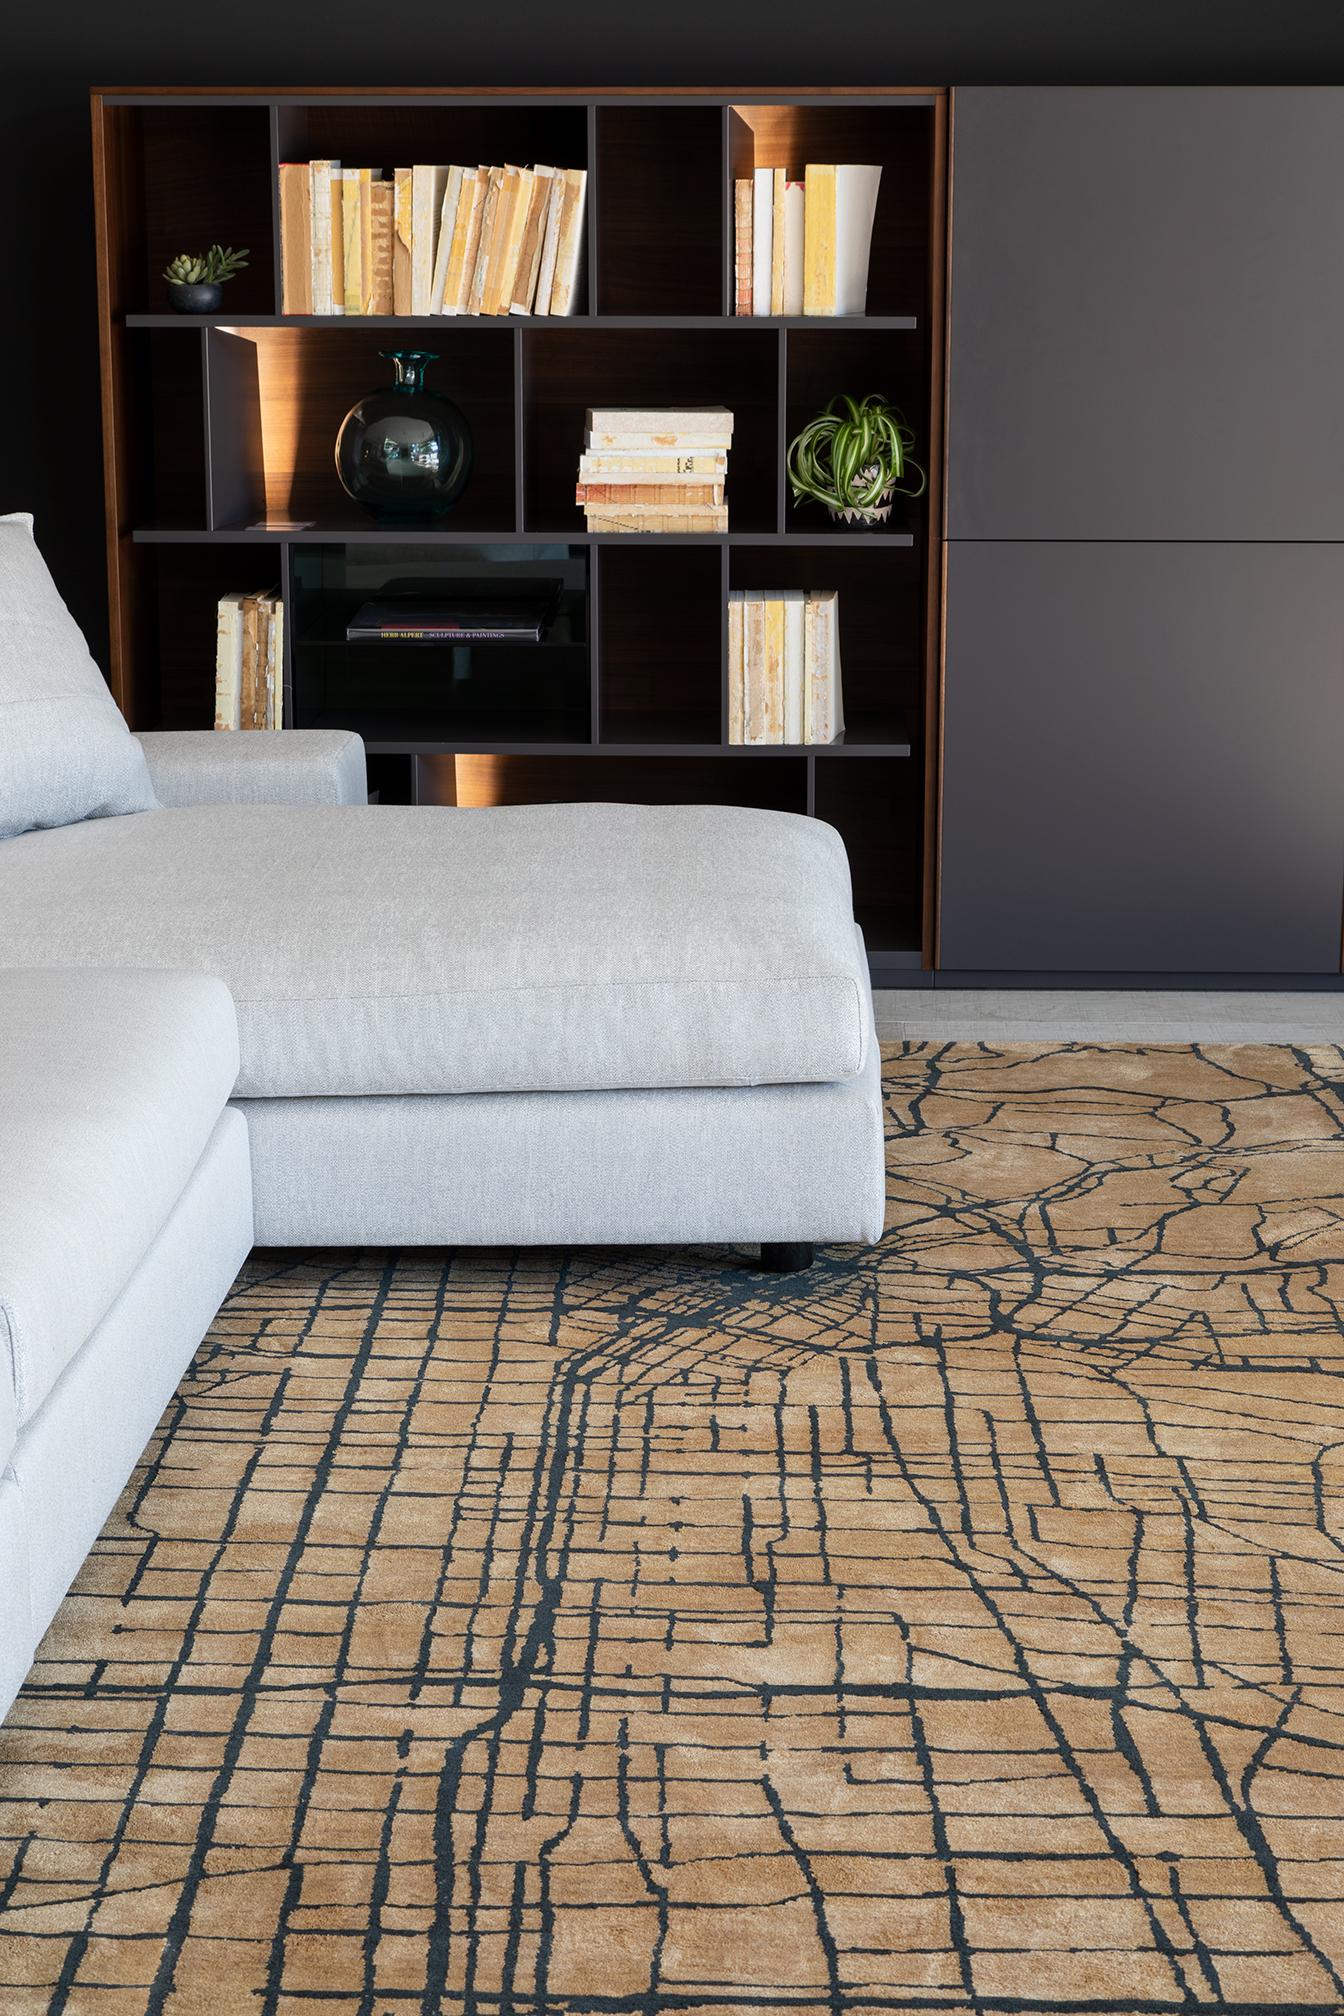 Mason is an homage to Erica's L.A. roots. The rug takes the bird's eye (or
private plane) view of the urban landscape into a wool field of gold traced with
black, cream traced with silver, with other colorways available including dark
charcoal